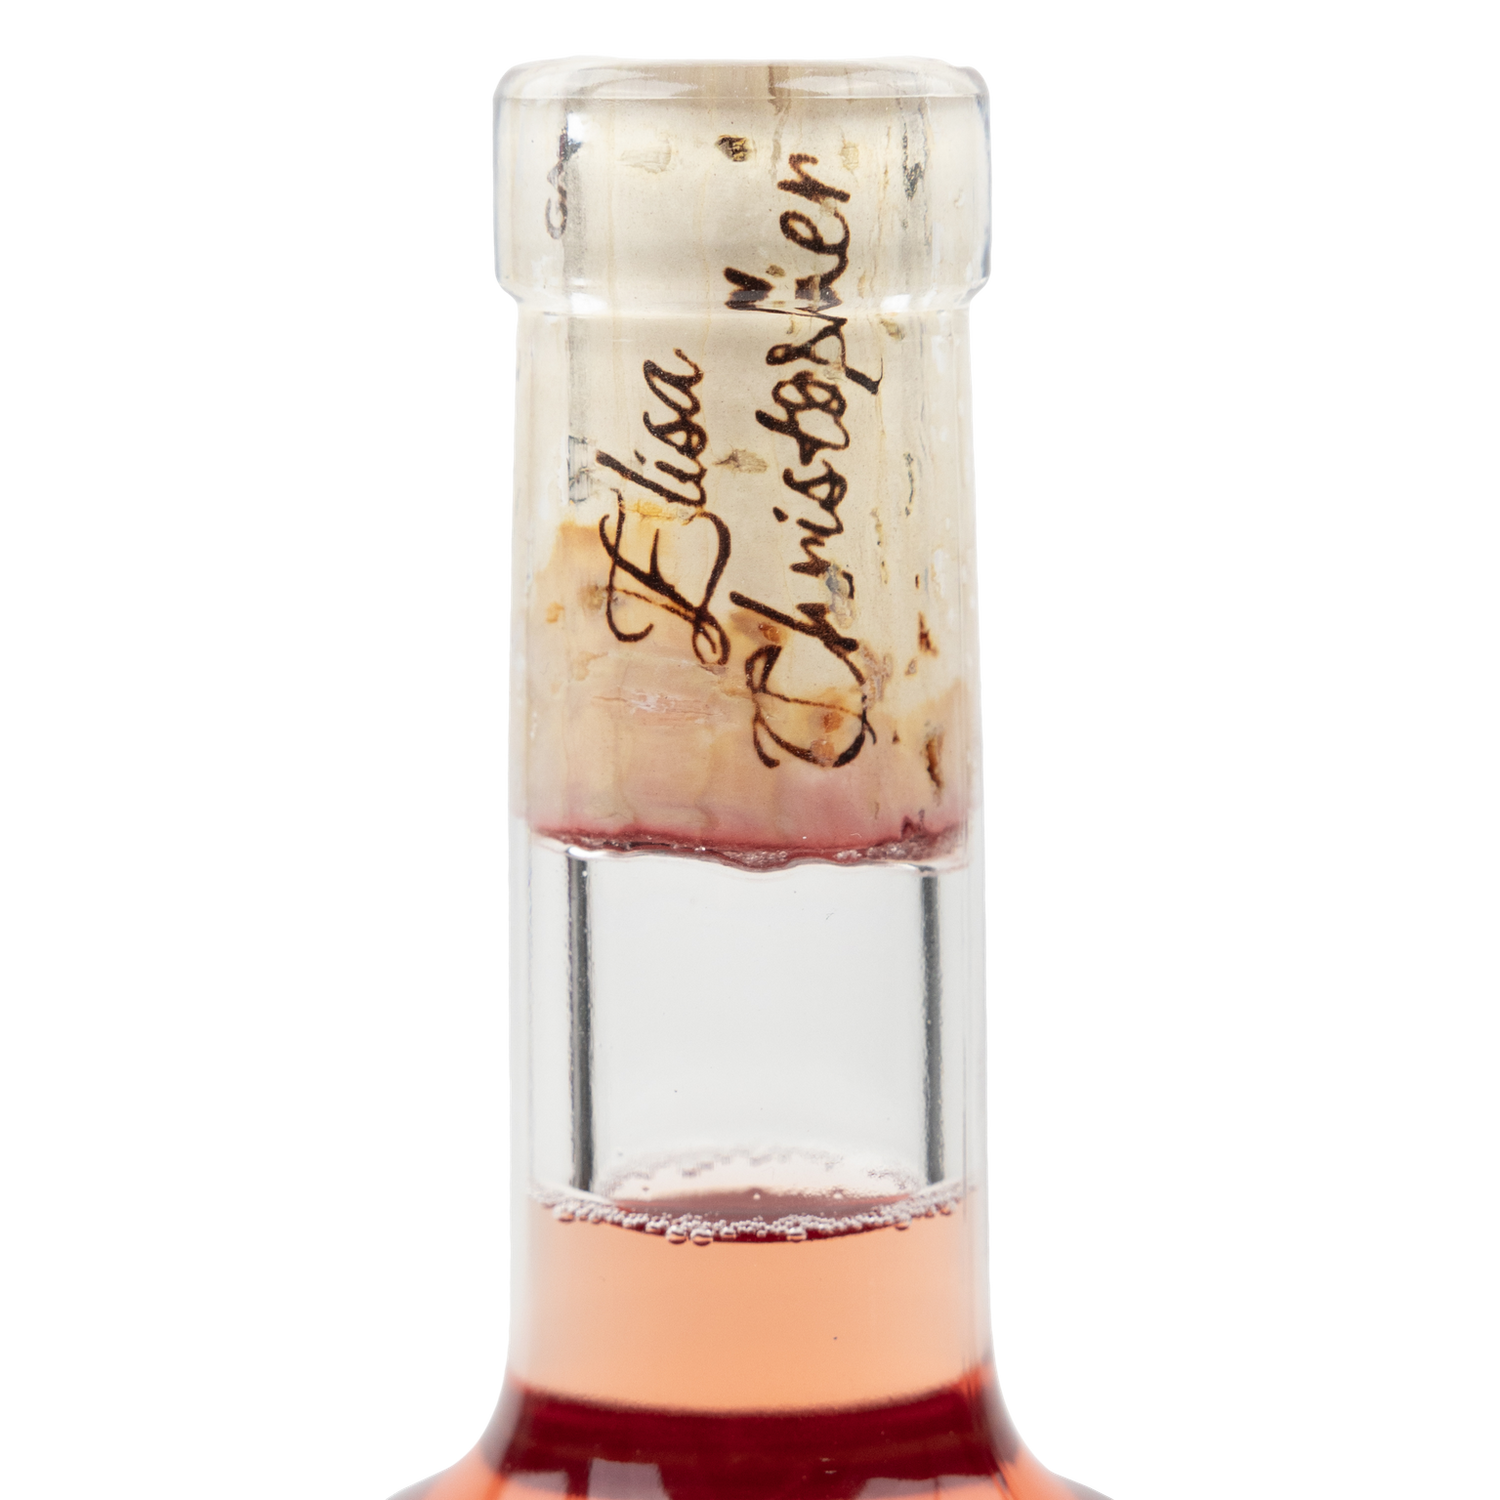 In Store Pickup Or Local Delivery Only: 2021 Cinsaut Rose